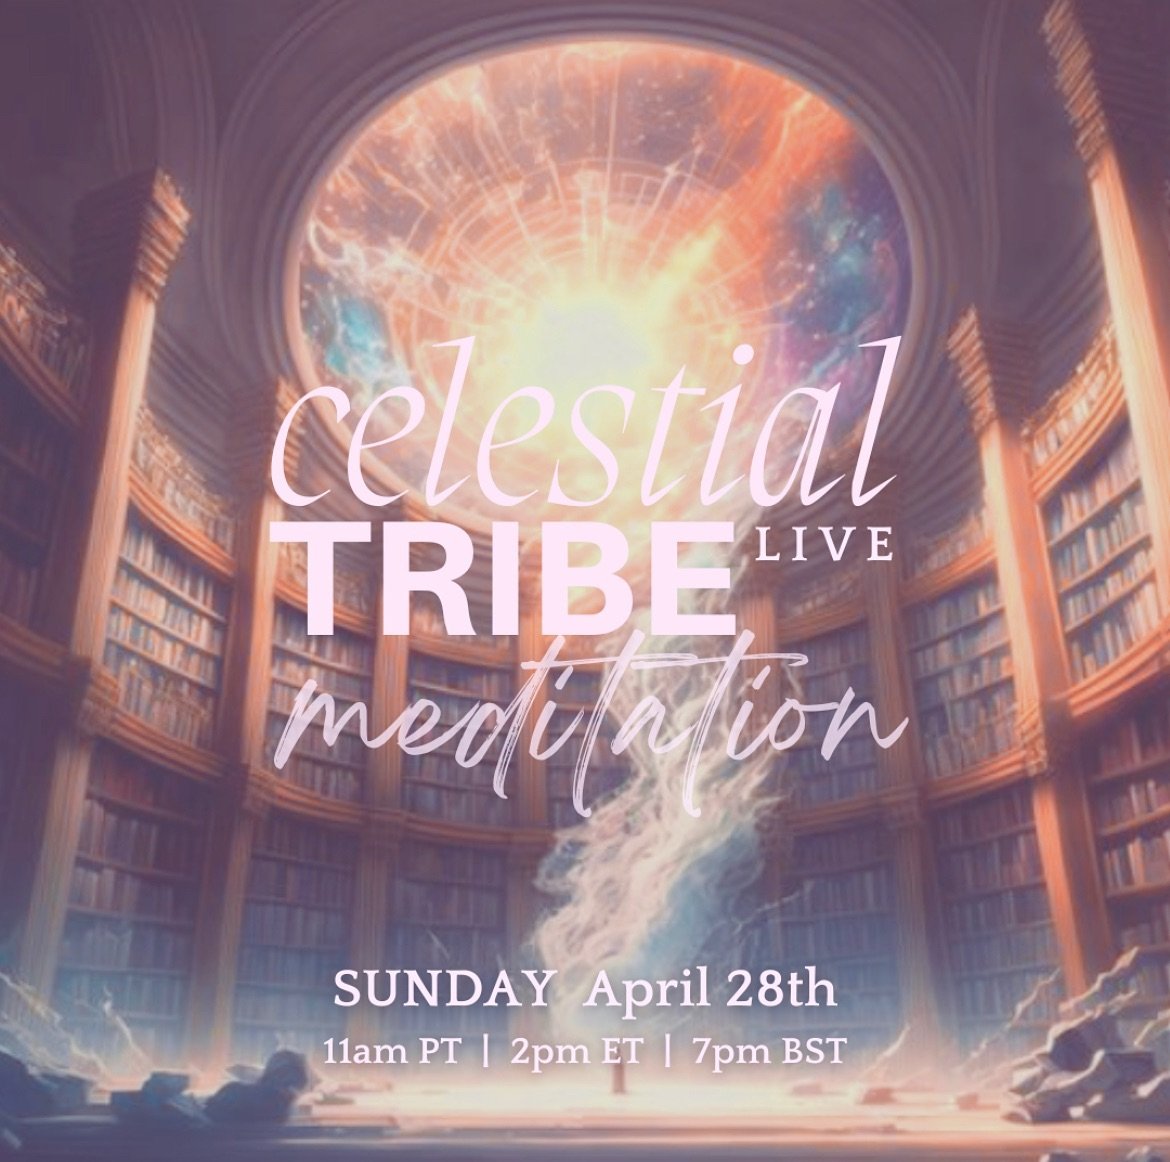 Join me TODAY, Sunday April 28th, for a magical LIVE guided meditation as we journey through a celestial portal to the Akashic Library of Light.✨

Here you will connect to the pathway of your soul, learning more about your divine purpose on Earth and